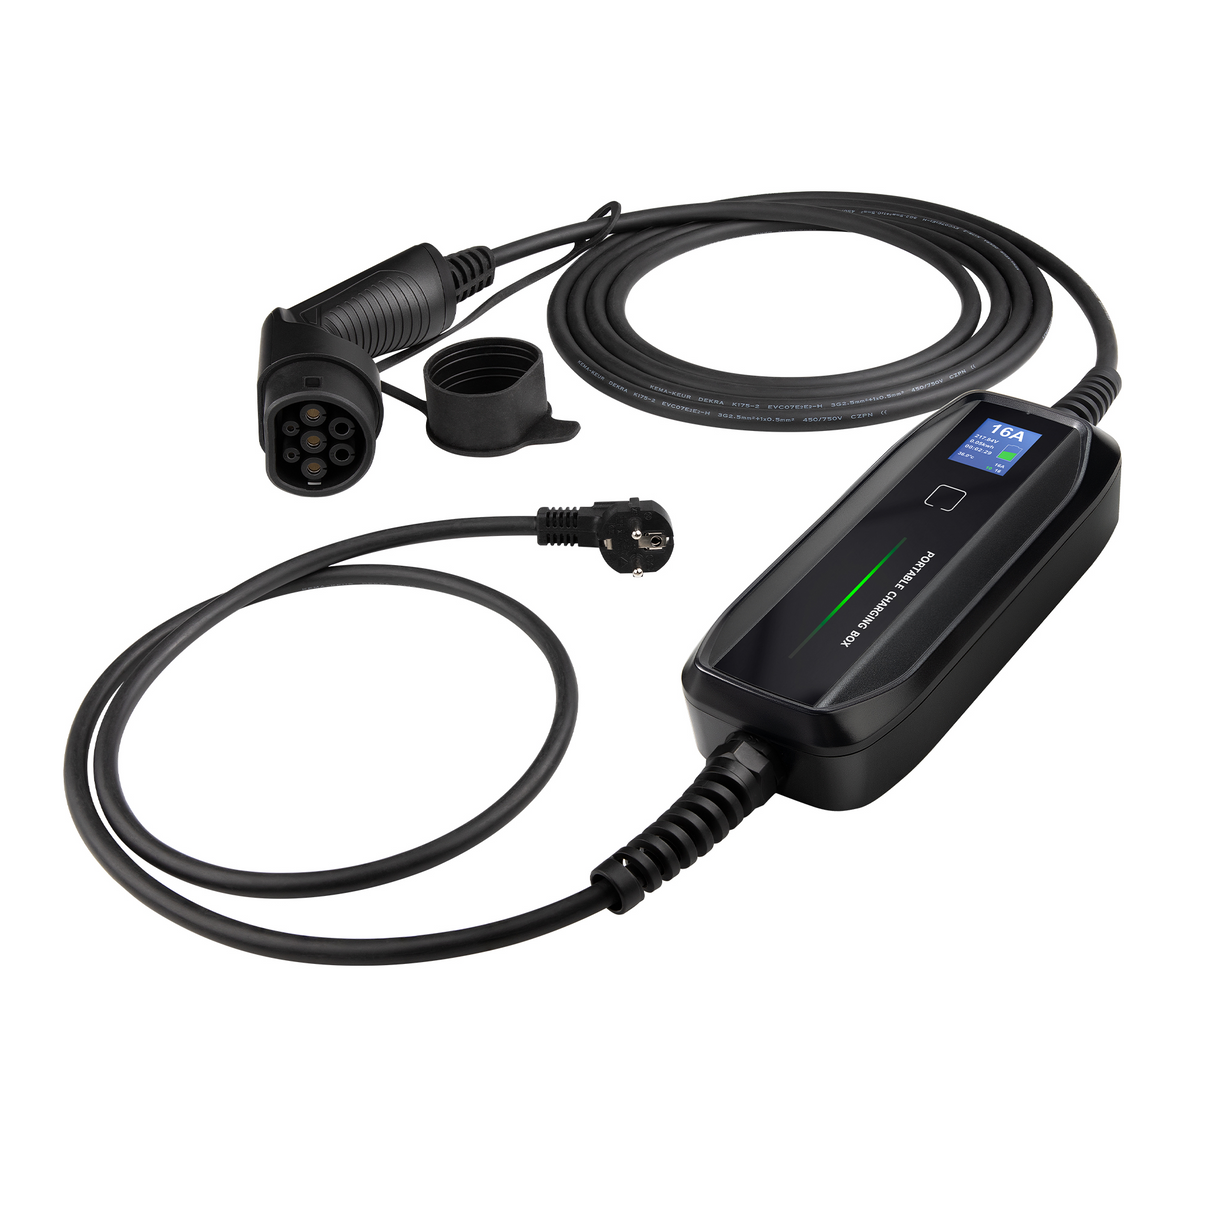 Mobile Charger Hyundai Kona - Besen with LCD - Type 2 to Schuko